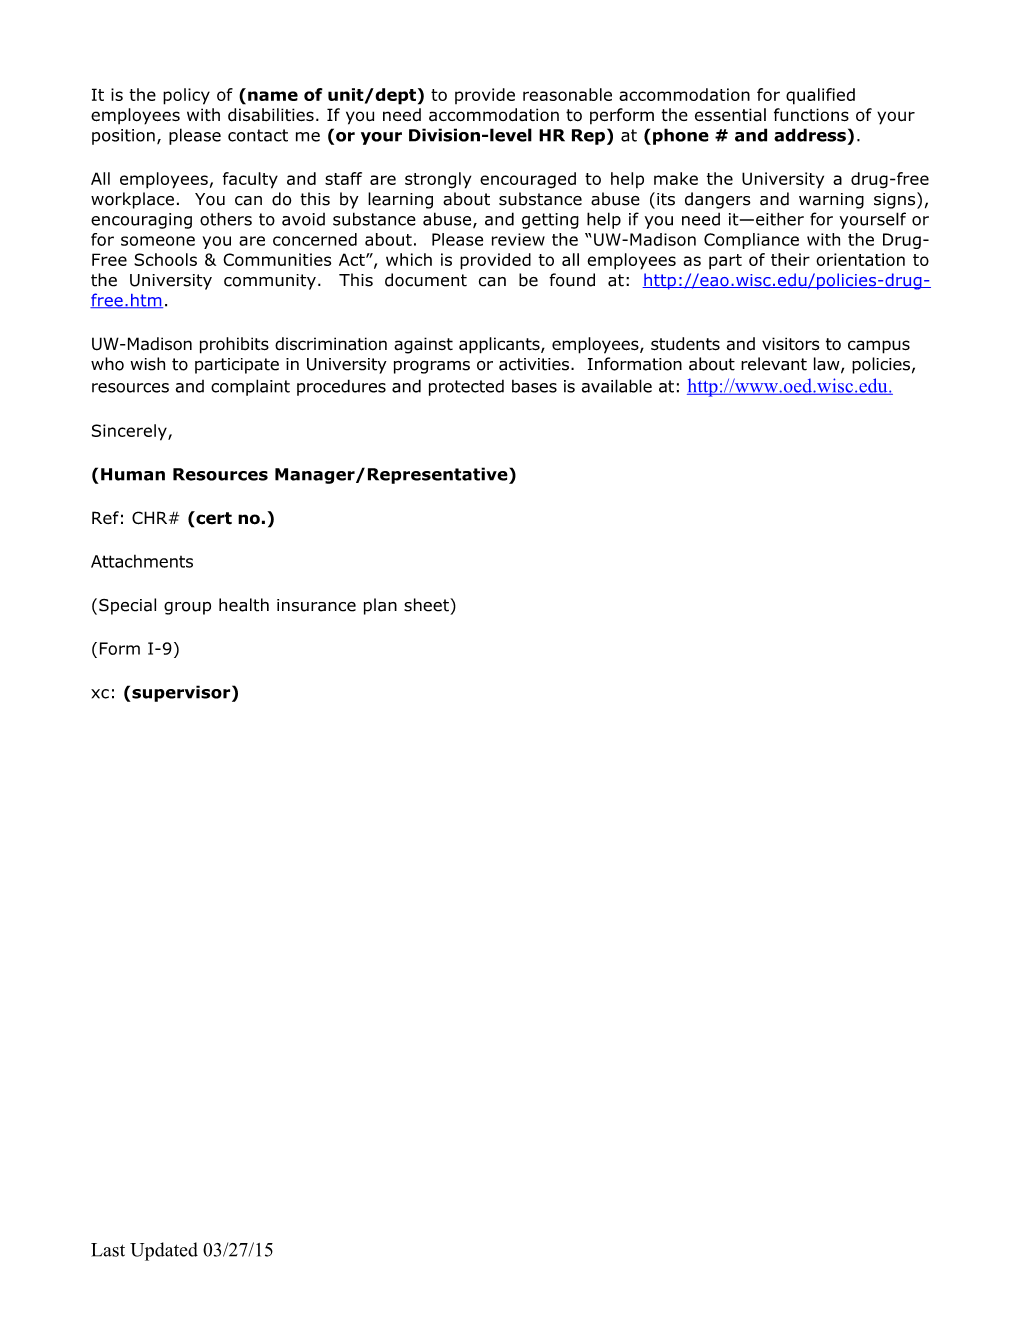 Appendix 5-Gsample Letter of Appointment - LTE